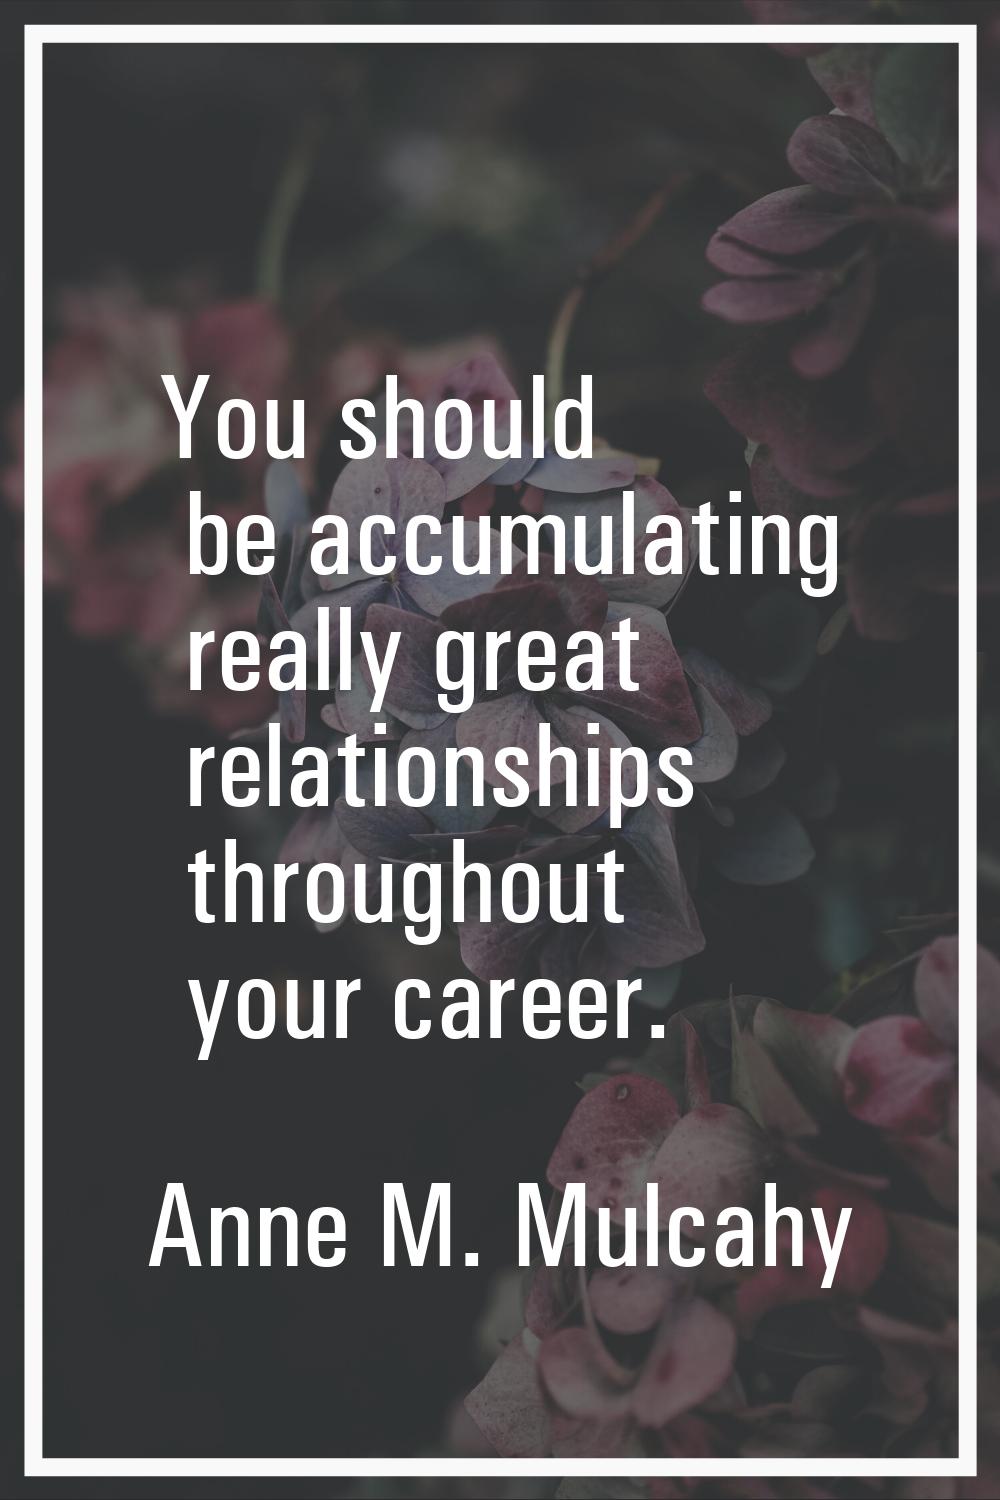 You should be accumulating really great relationships throughout your career.